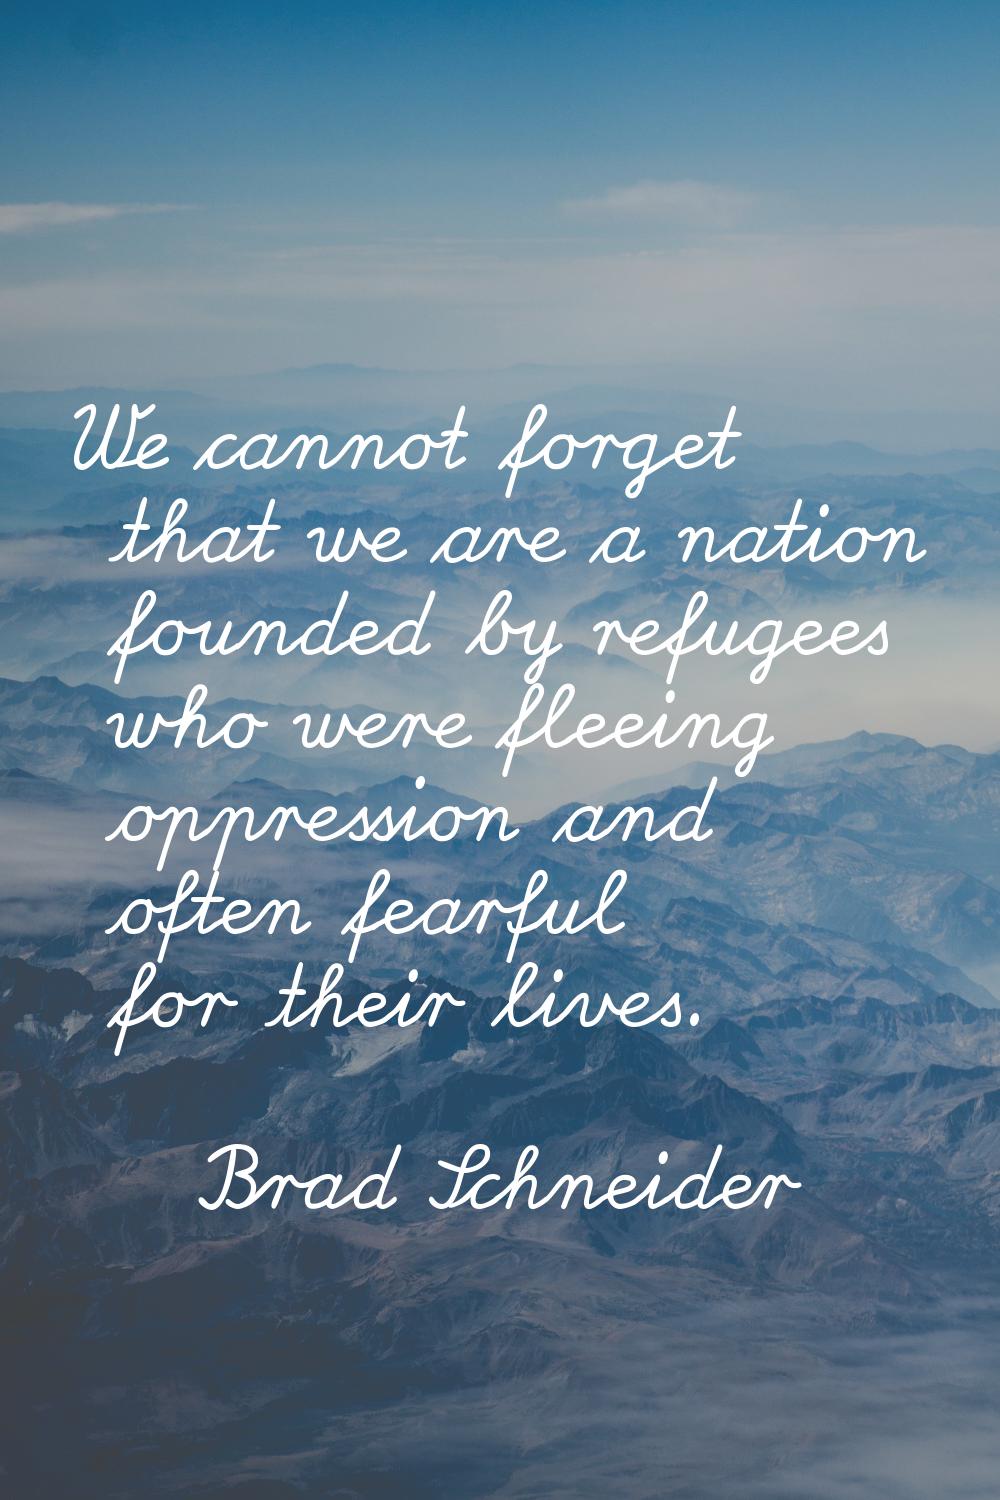 We cannot forget that we are a nation founded by refugees who were fleeing oppression and often fea